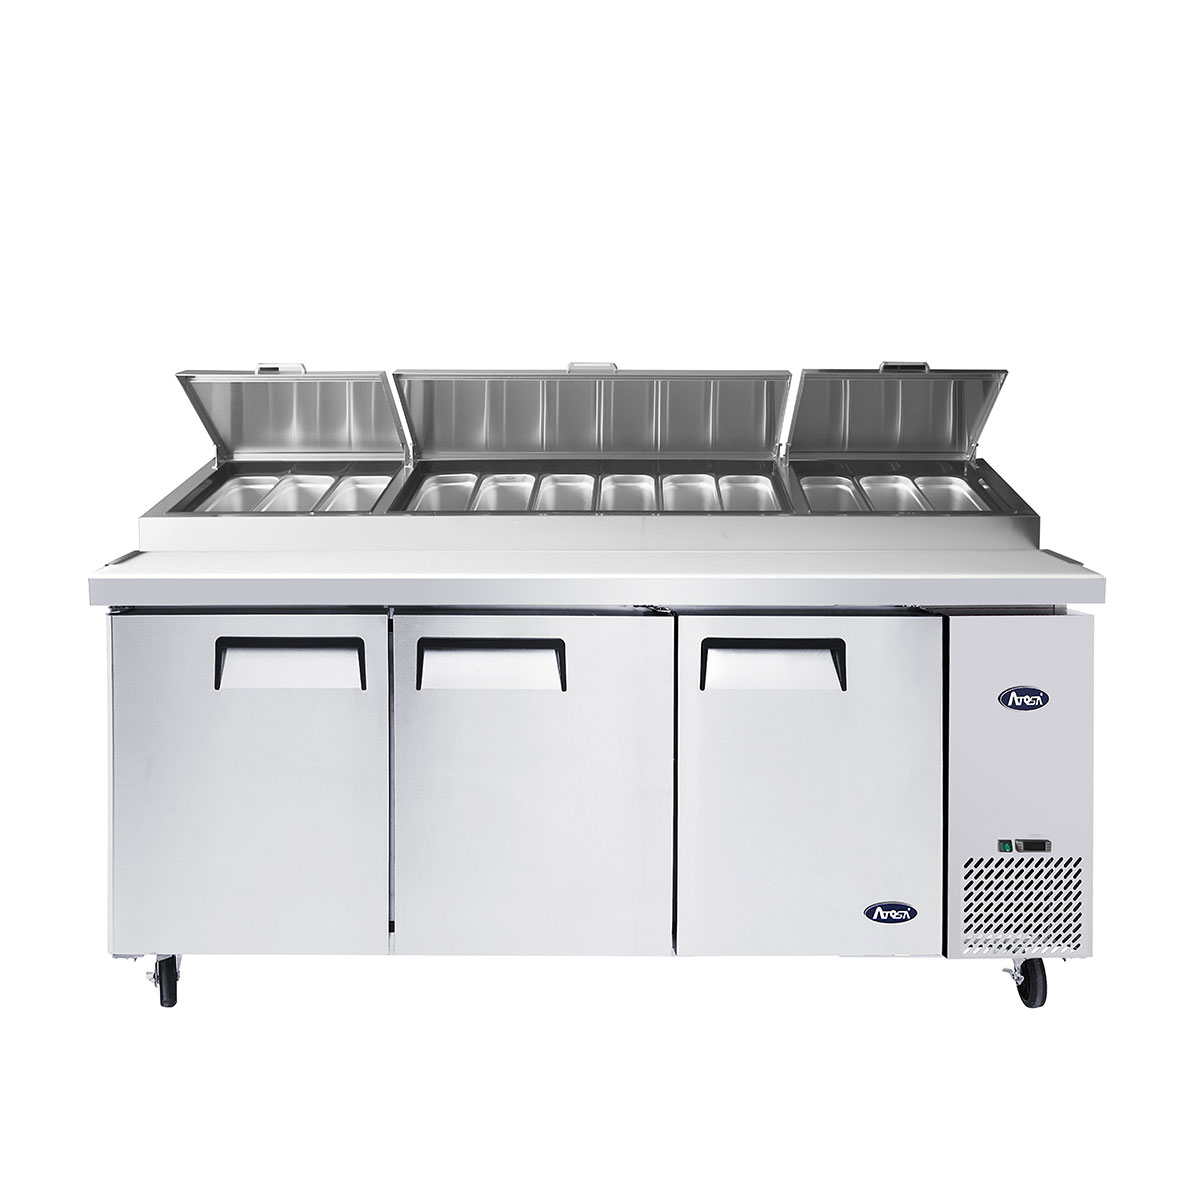 AFP / S903 refrigerated saladette pizzeria in stainless steel - Pizza  equipment